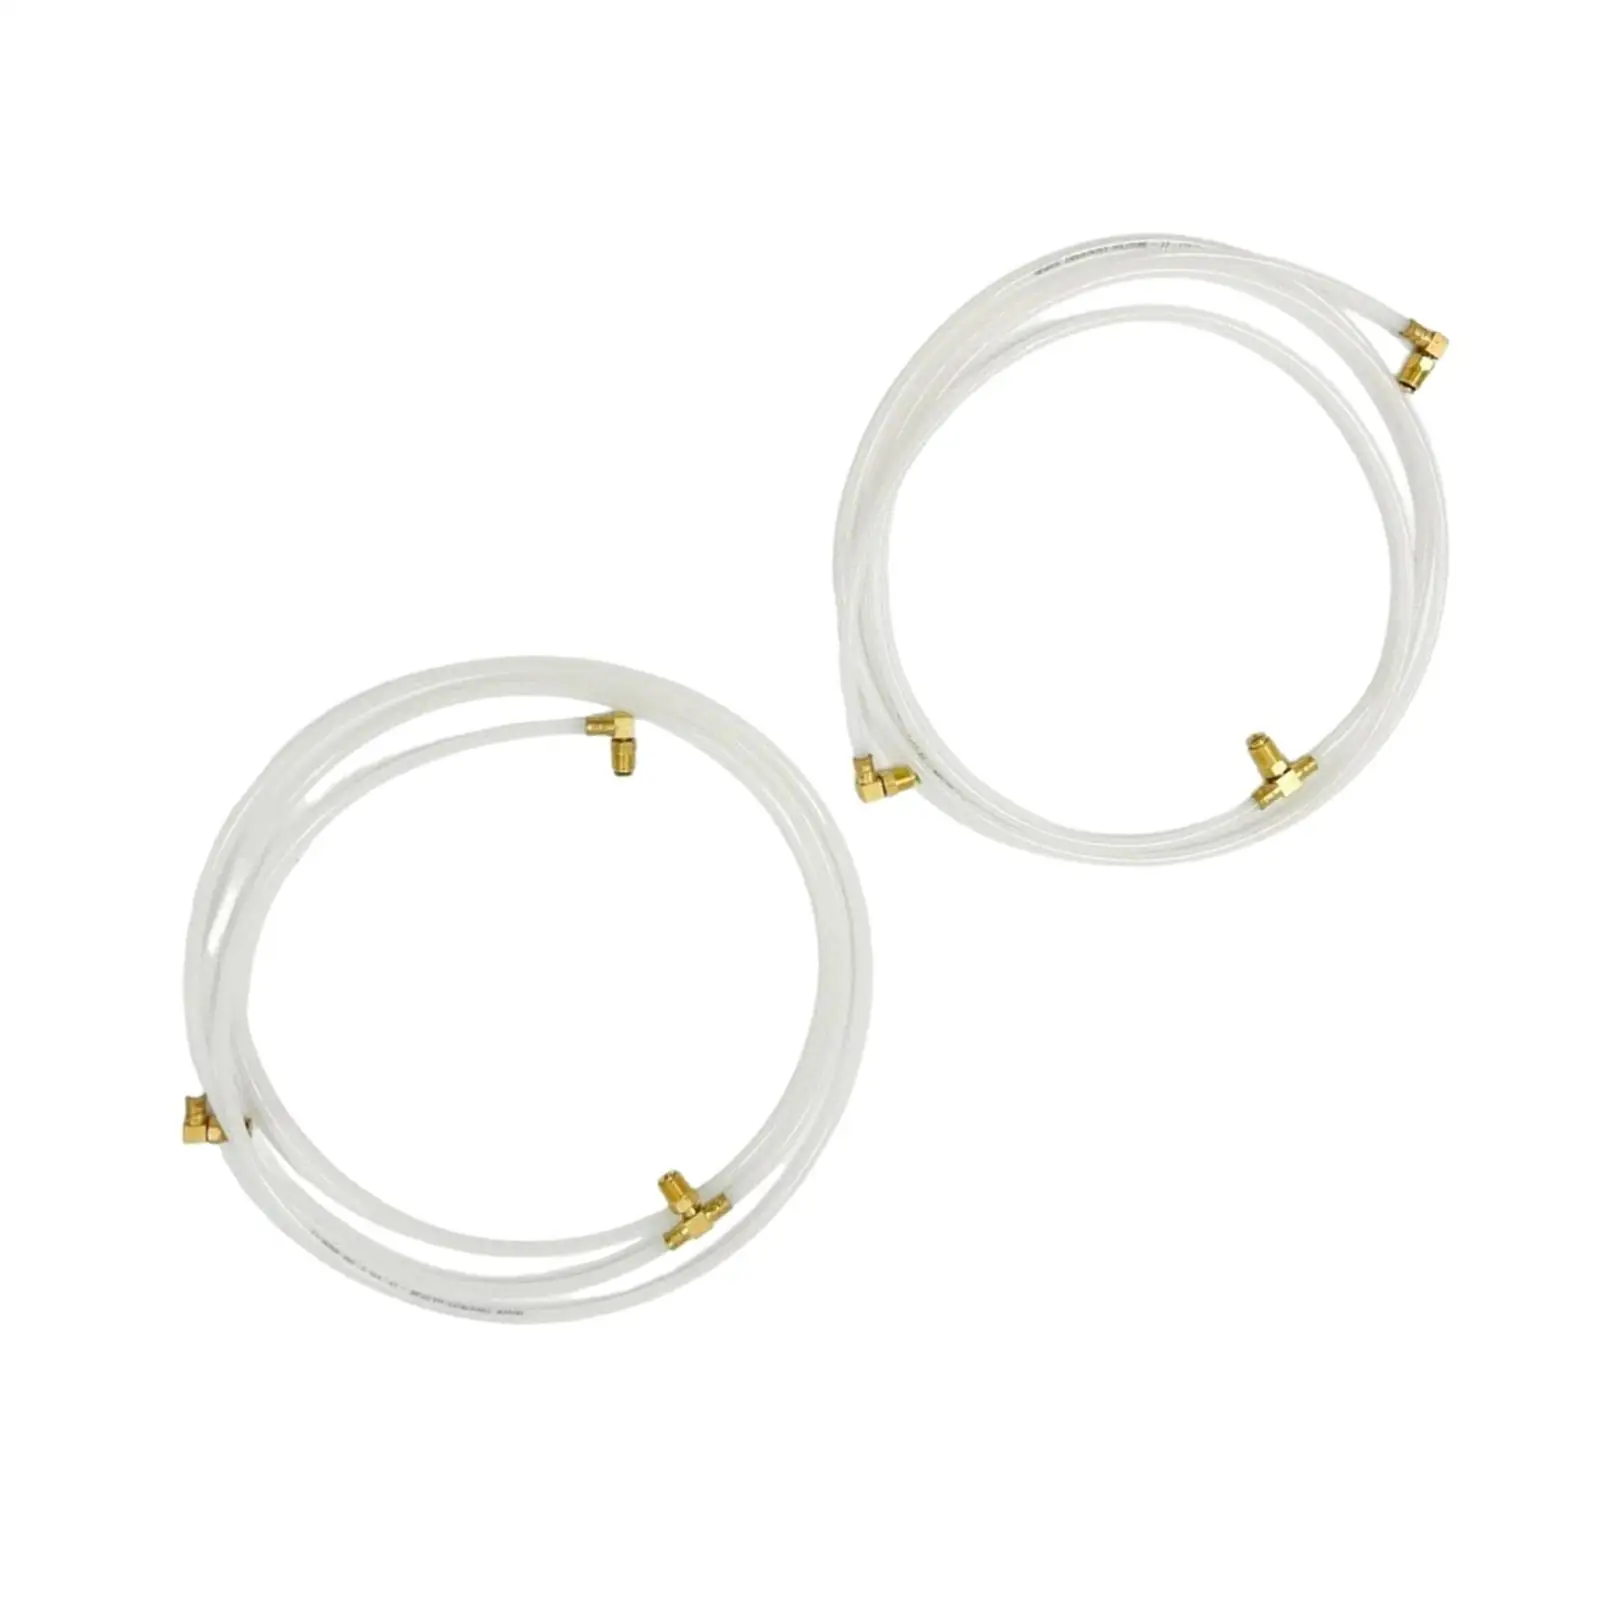 Pair Convertible Top Hydraulic Fluid Hose Lines for Chevrolet Corvair